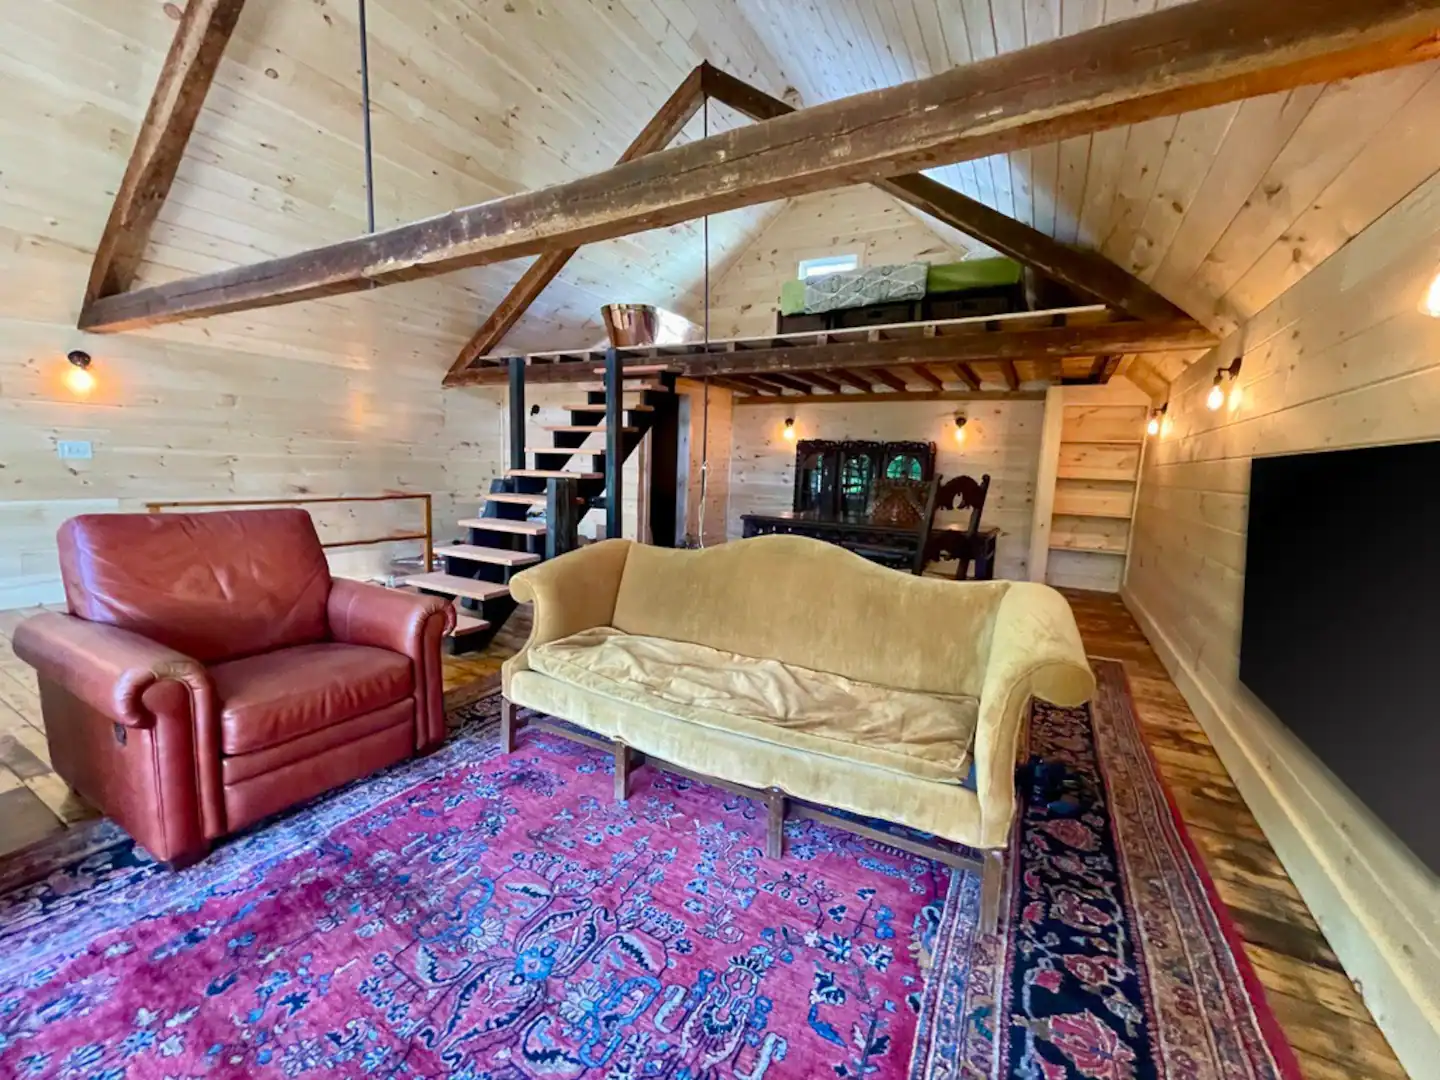 Waterfront barn, one of the best Airbnbs in Maine